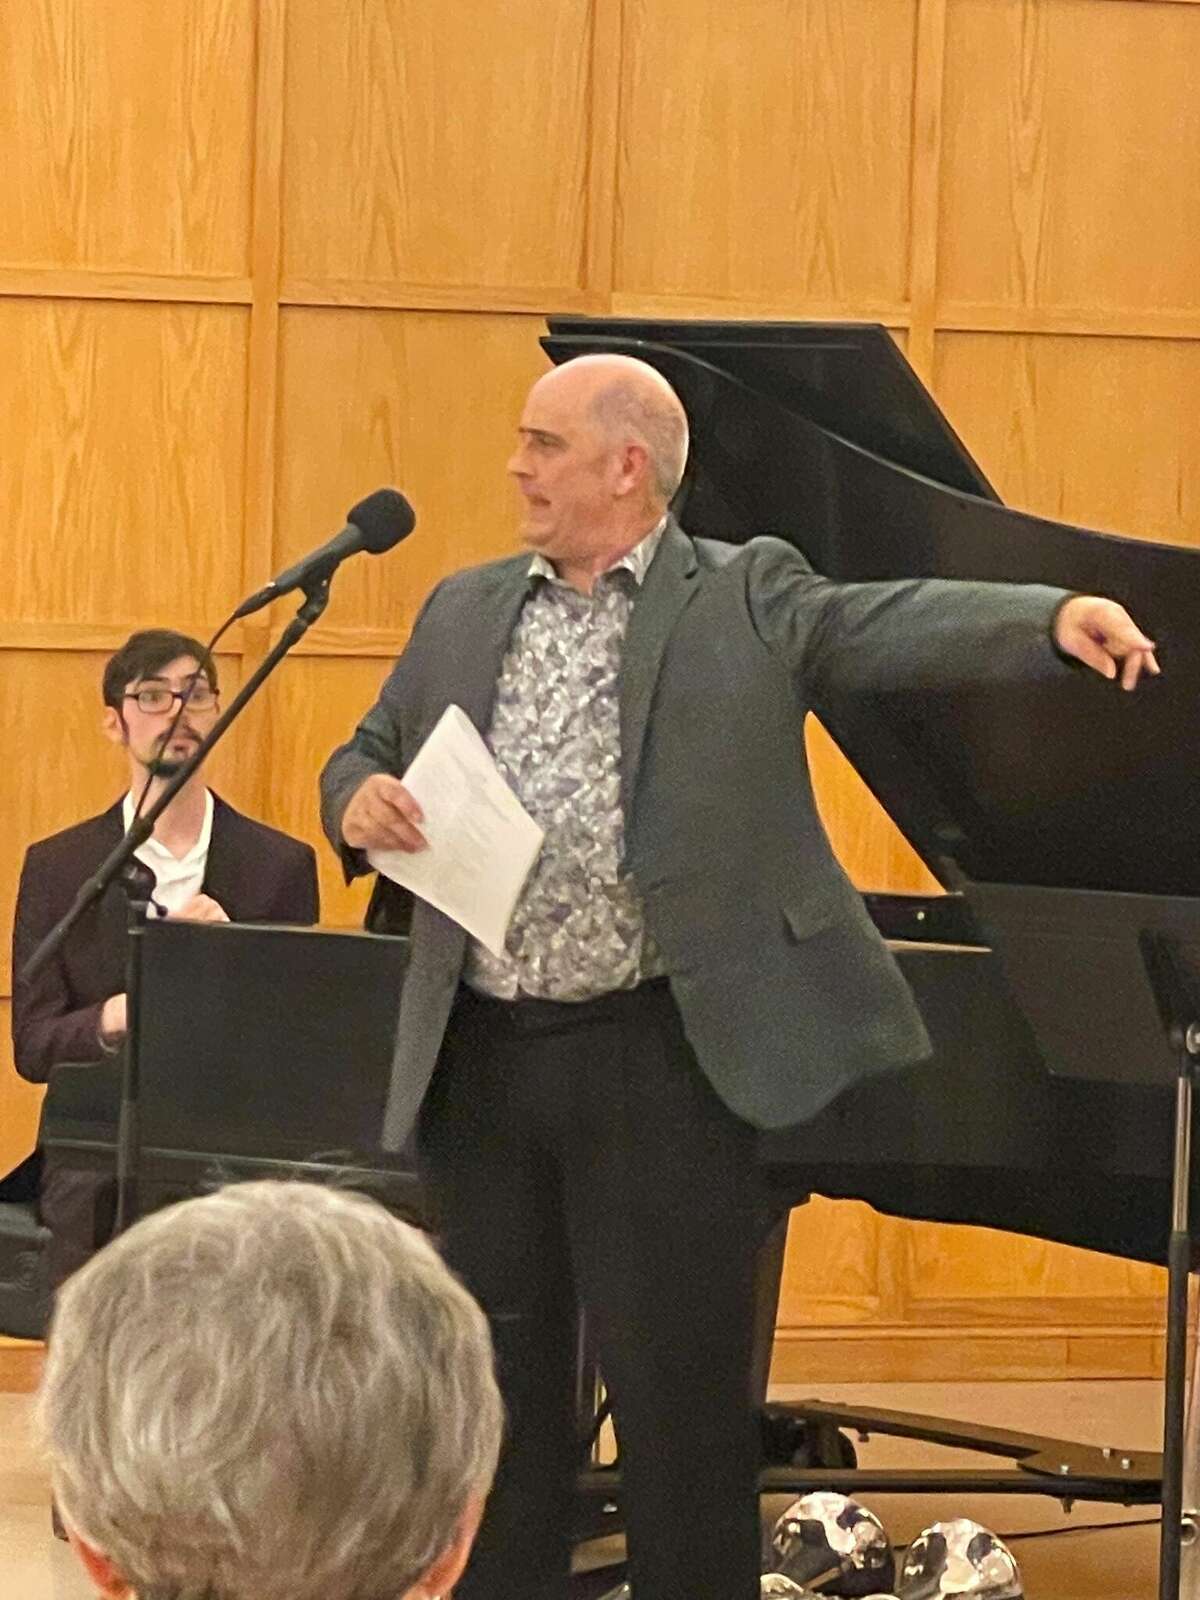 Tuba Bach held their first concert over the weekend, with Alvin Waddles and Noah Mallett — along with percussionist David Hall.